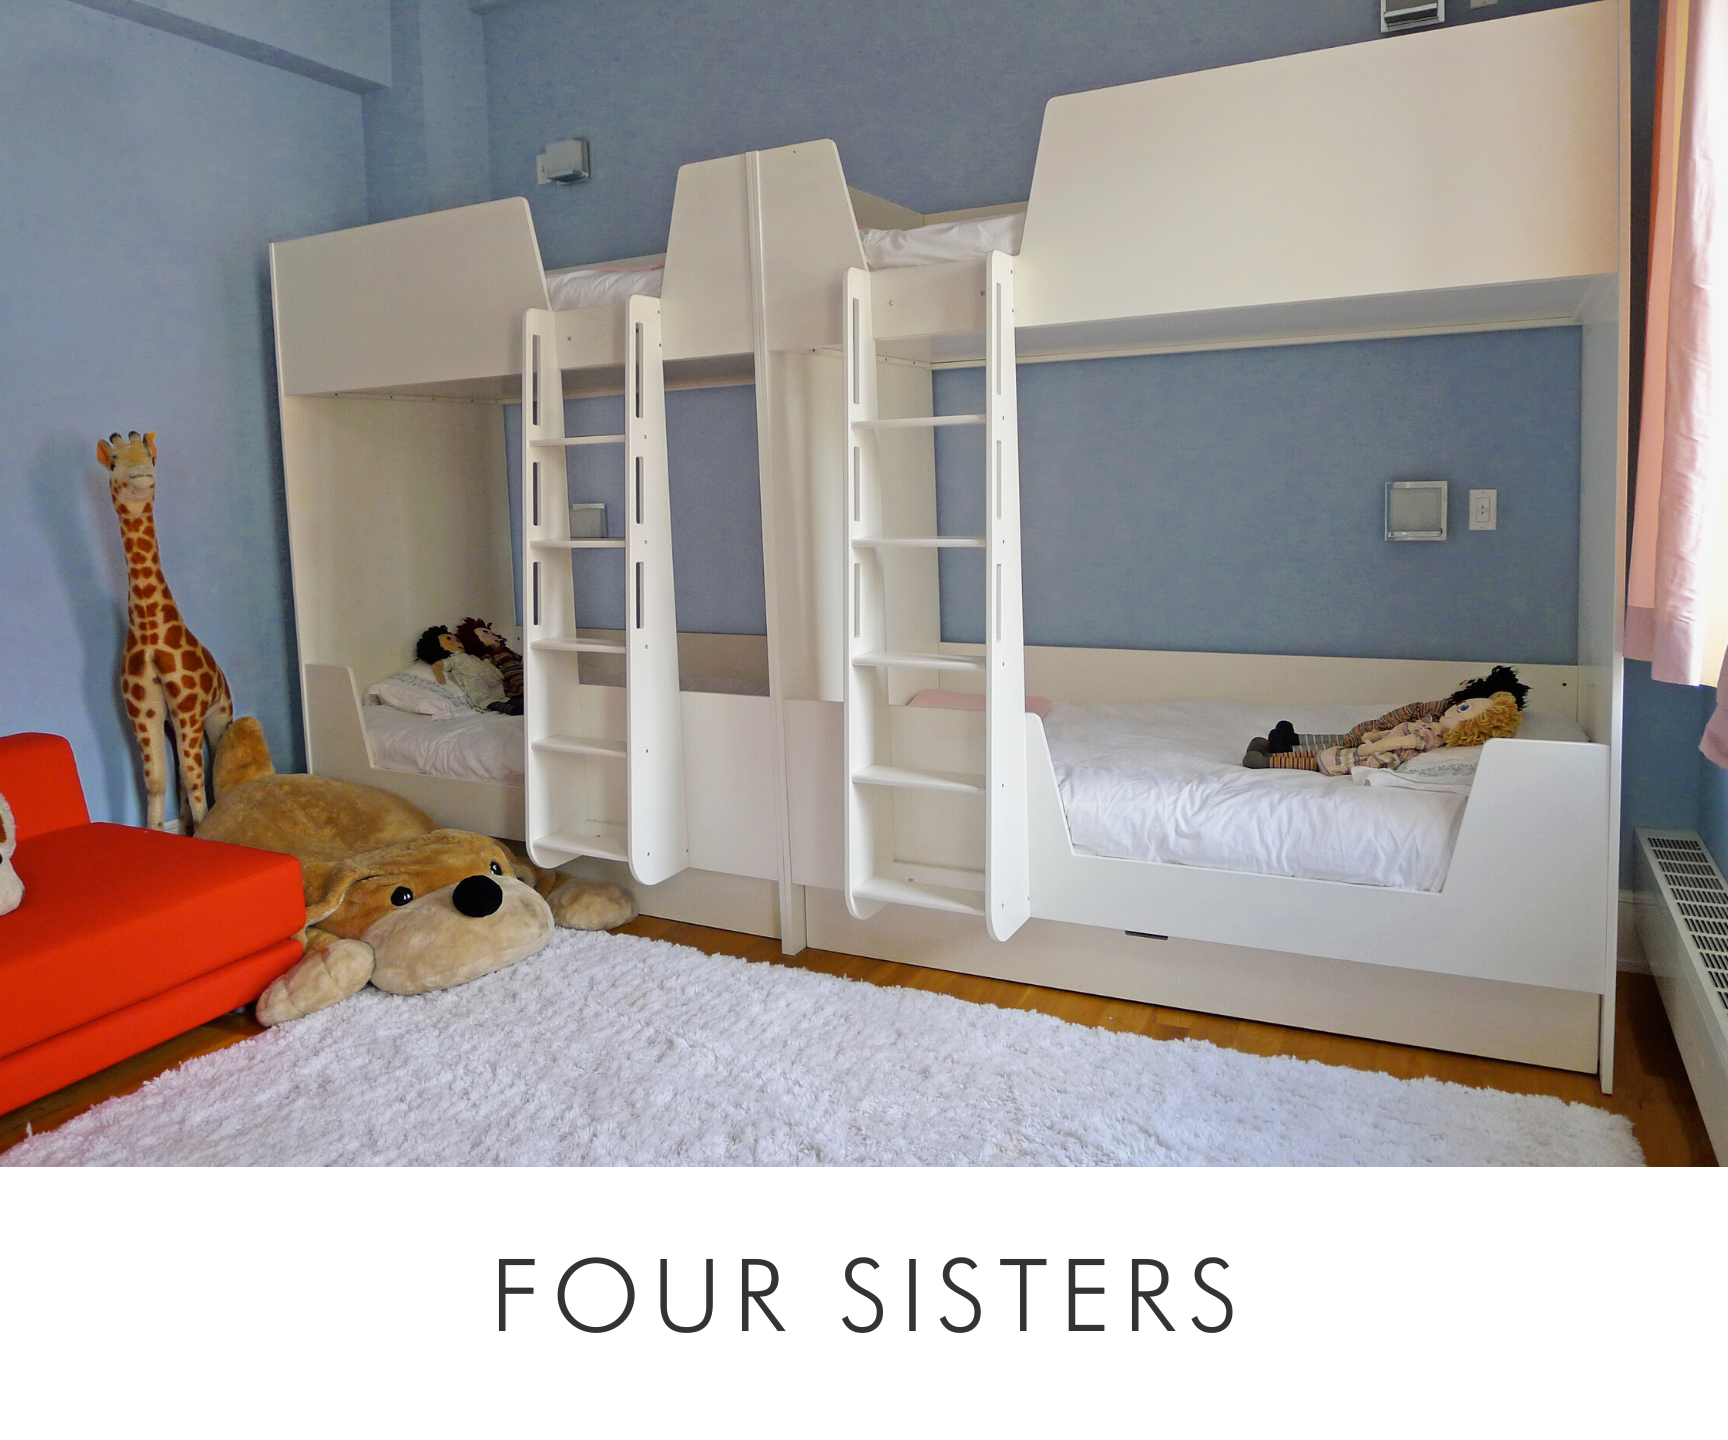 Four sister bright room with four white bunk beds, plush toys, fluffy rug, and a vibrant orange couch.